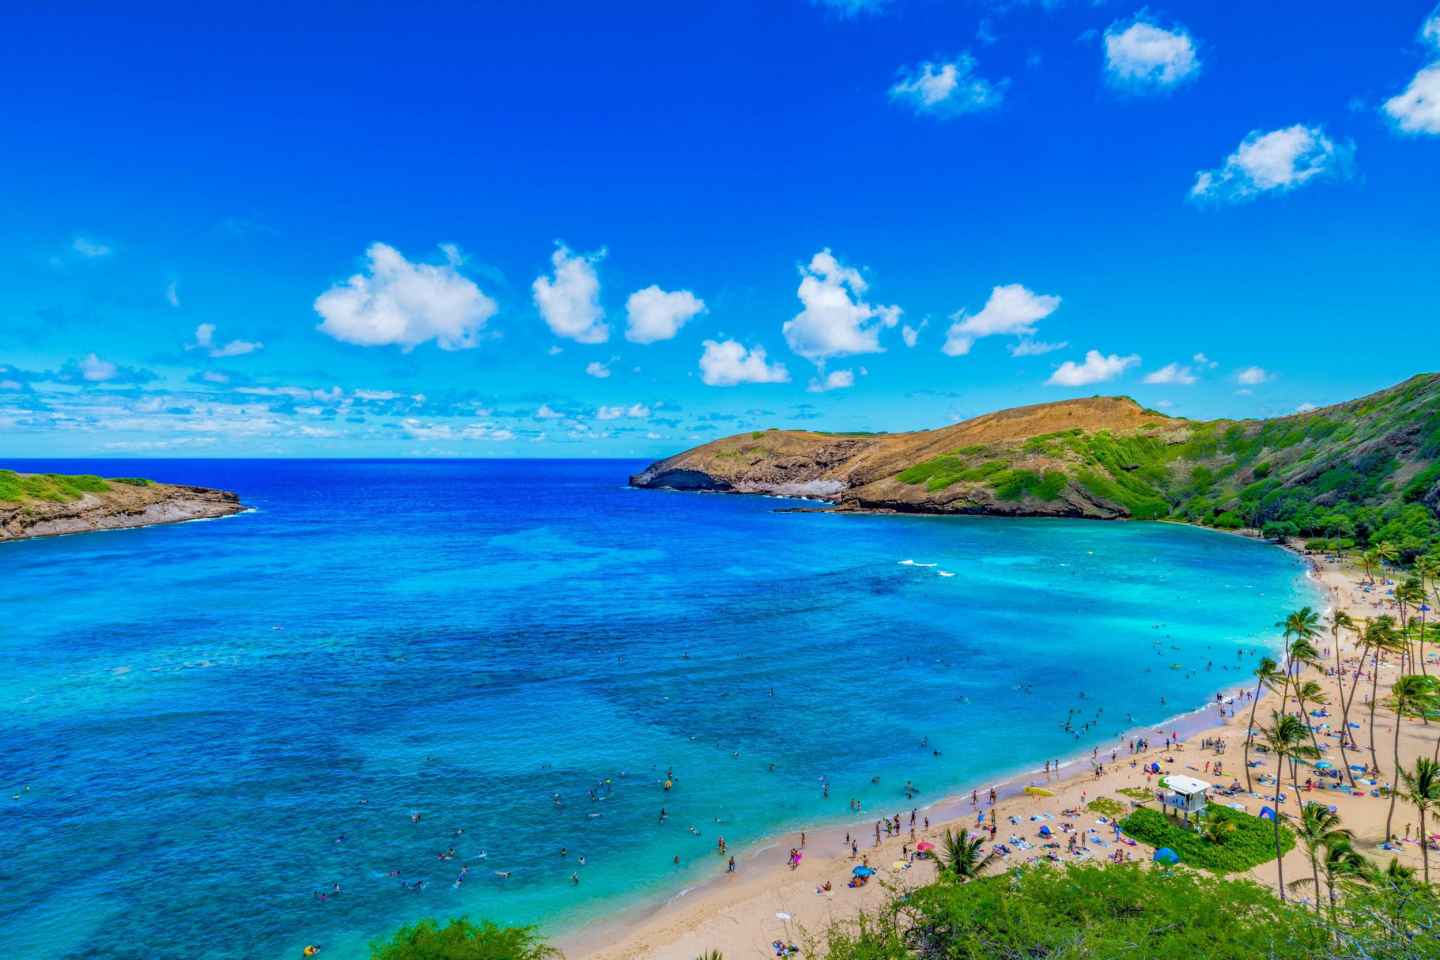 excursions in hawaii oahu